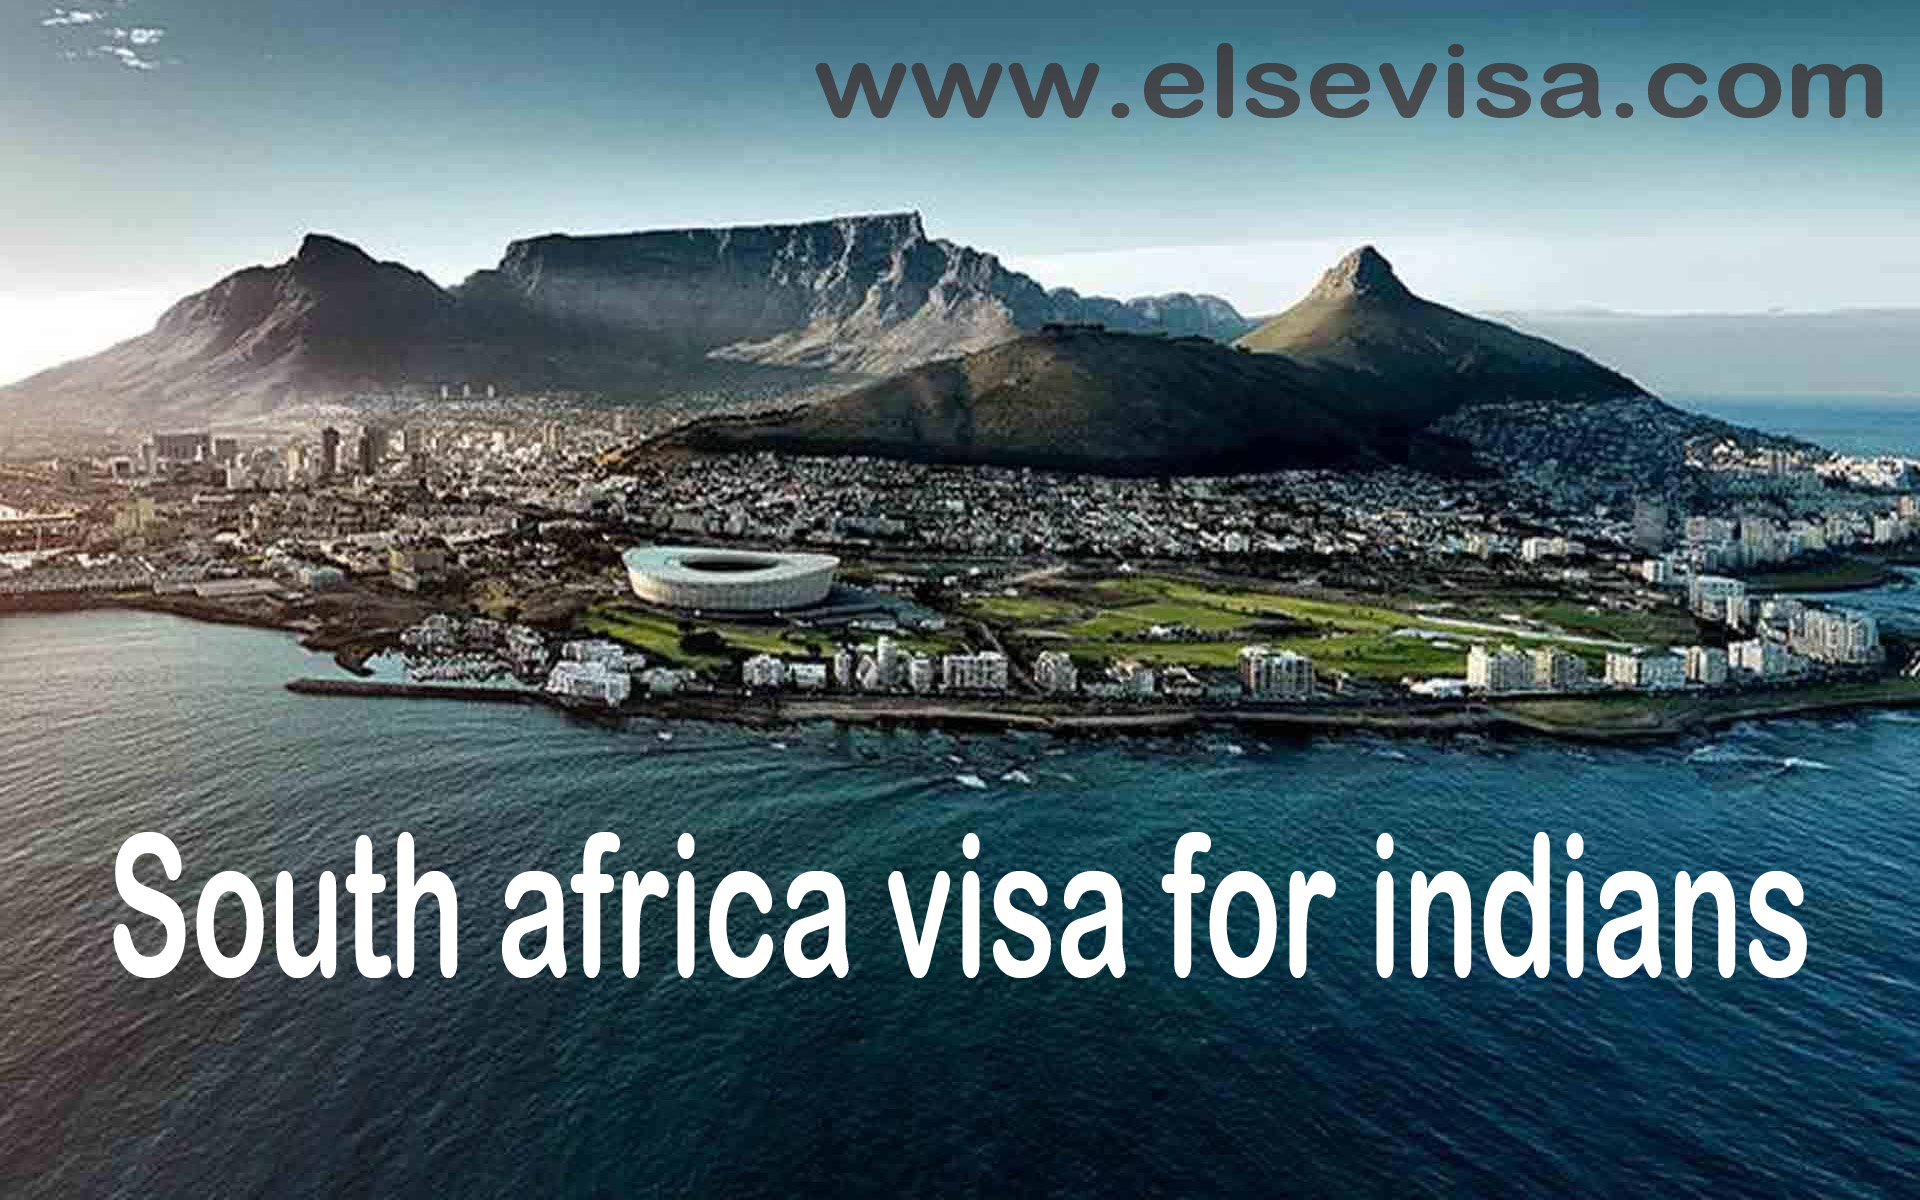 South africa visa for indians